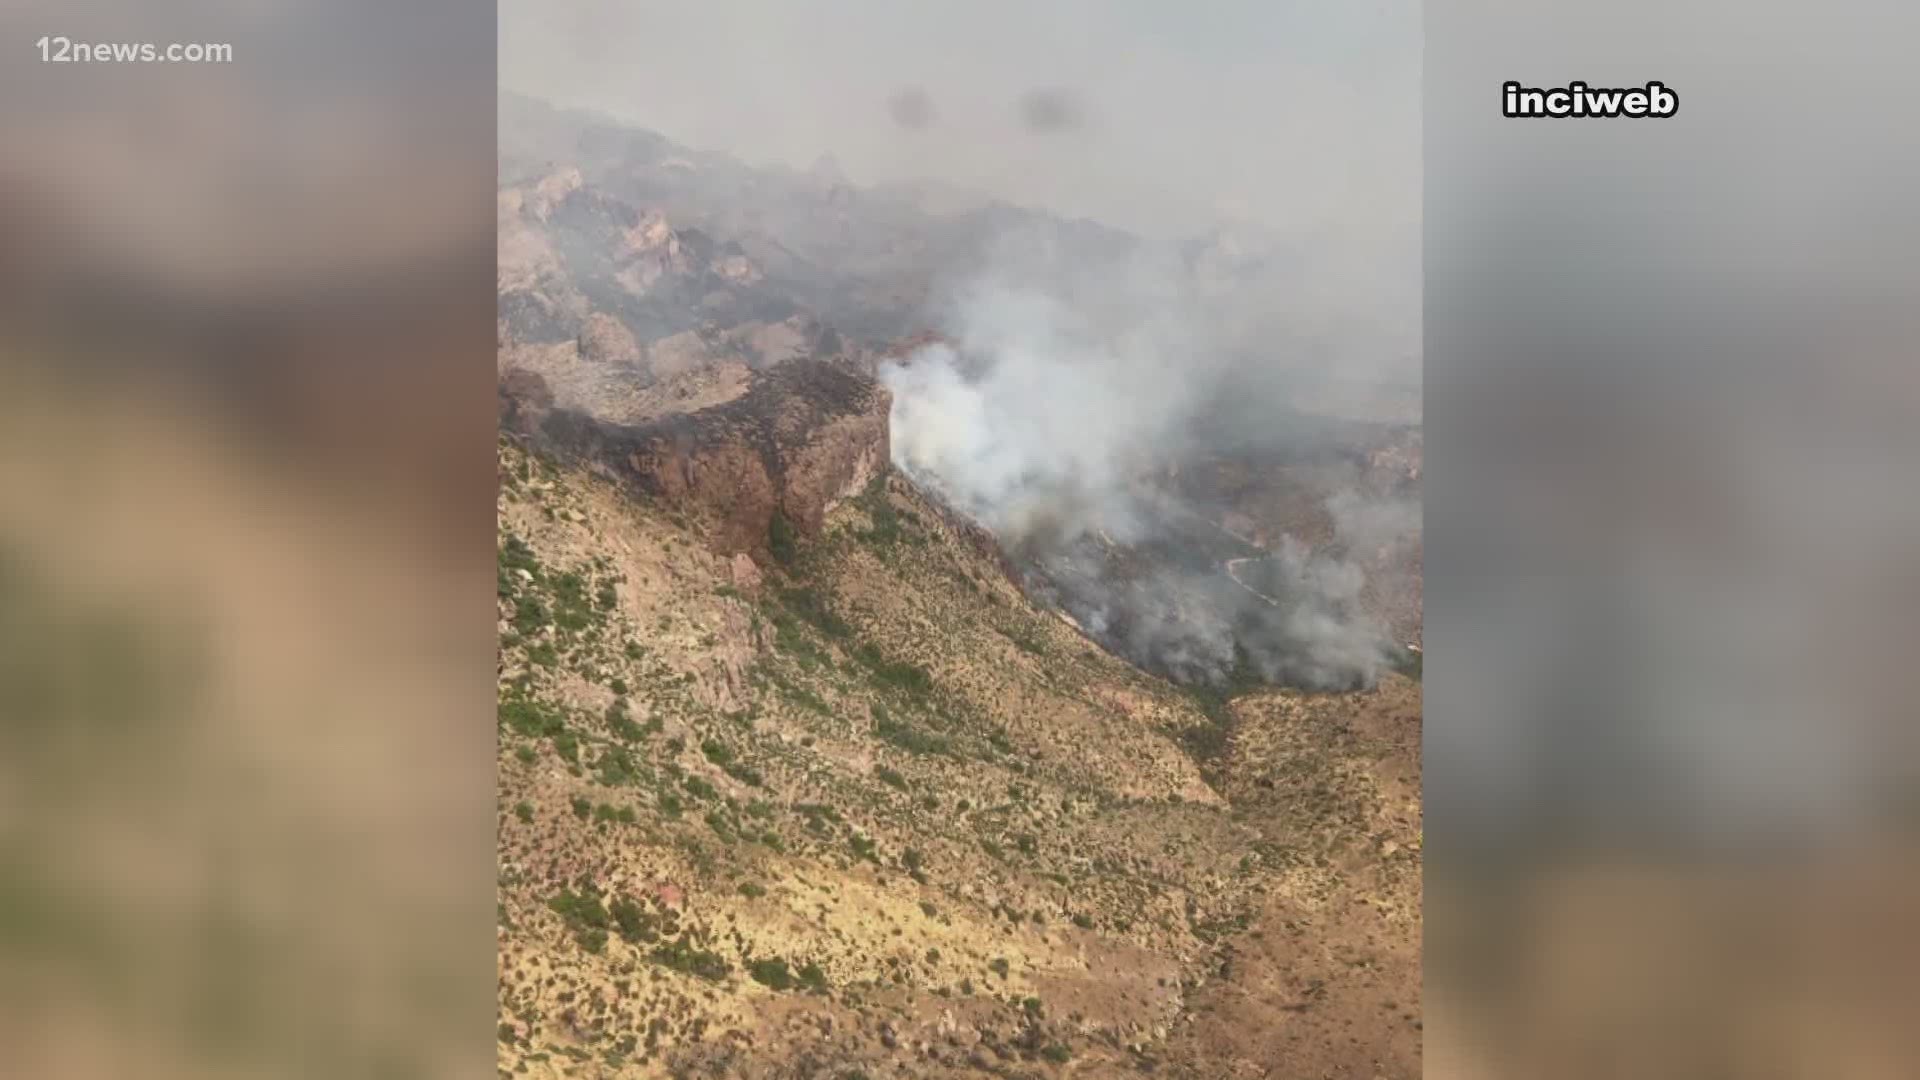 State fire officials confirmed a fire burning in the Superstition Wilderness Saturday night. Officials confirmed that the fire has burned 3,500 acres as of Sunday.